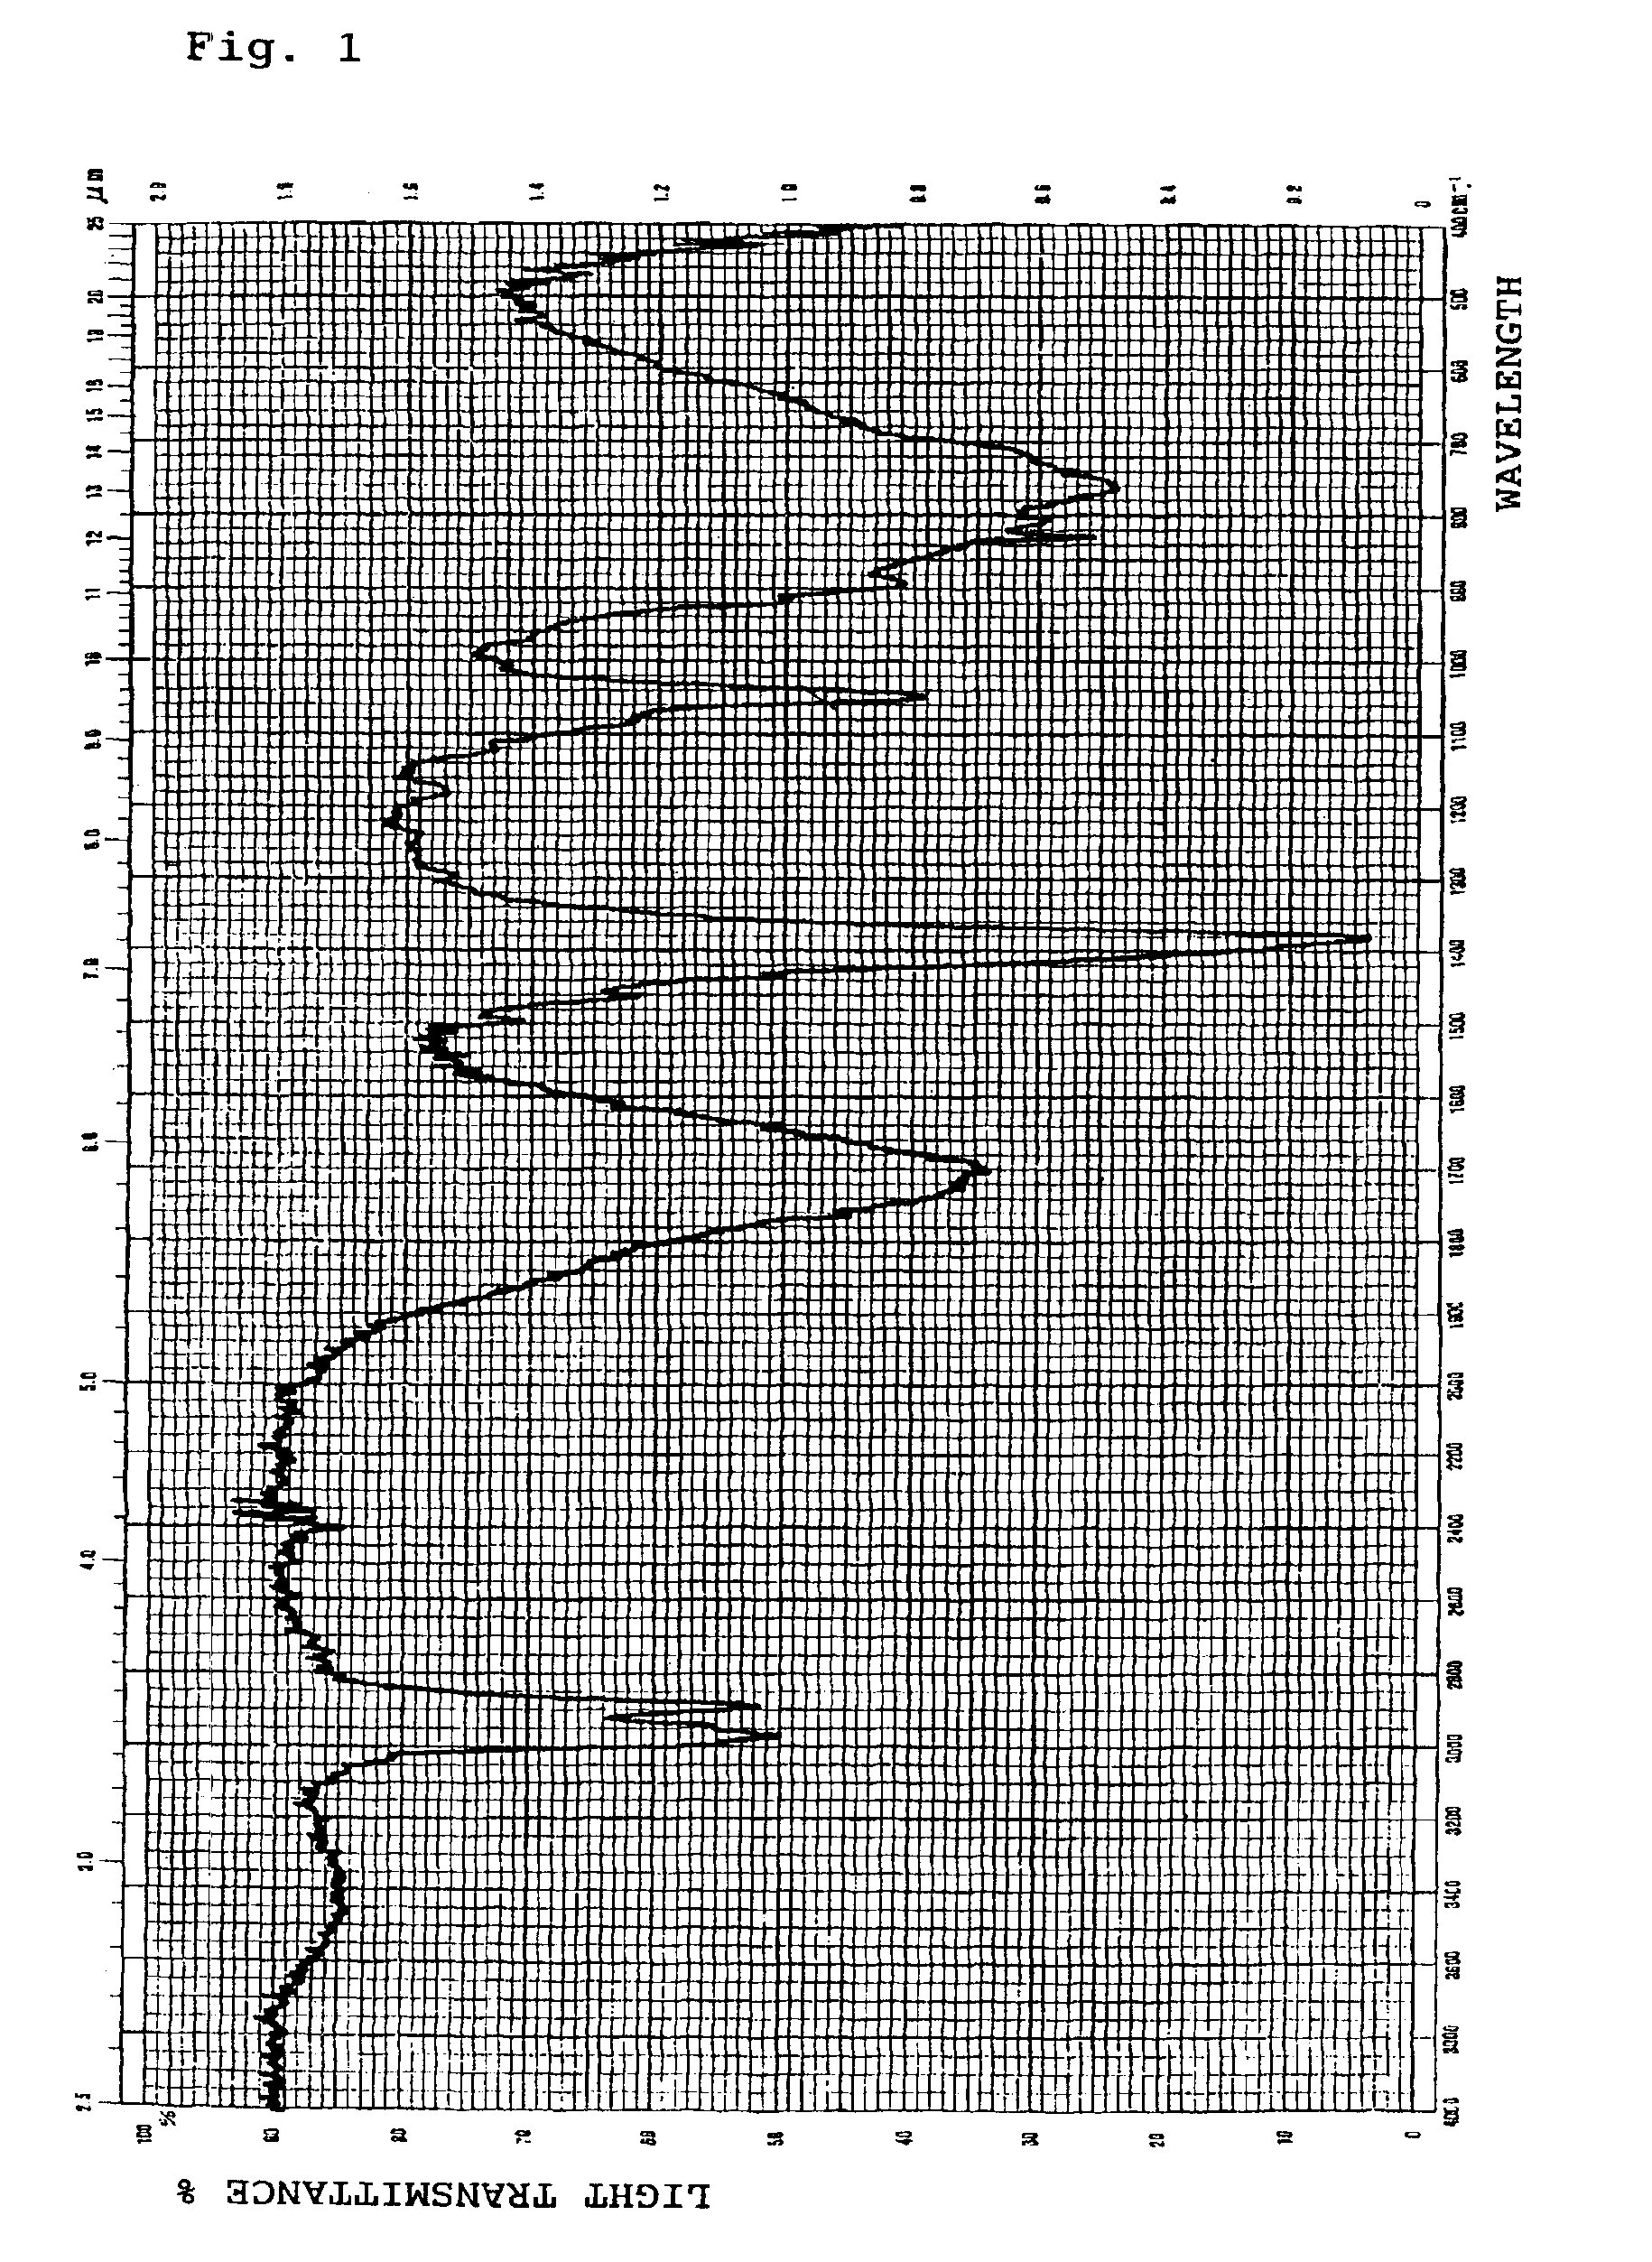 Conductive film forming composition, conductive film, and method for forming the same